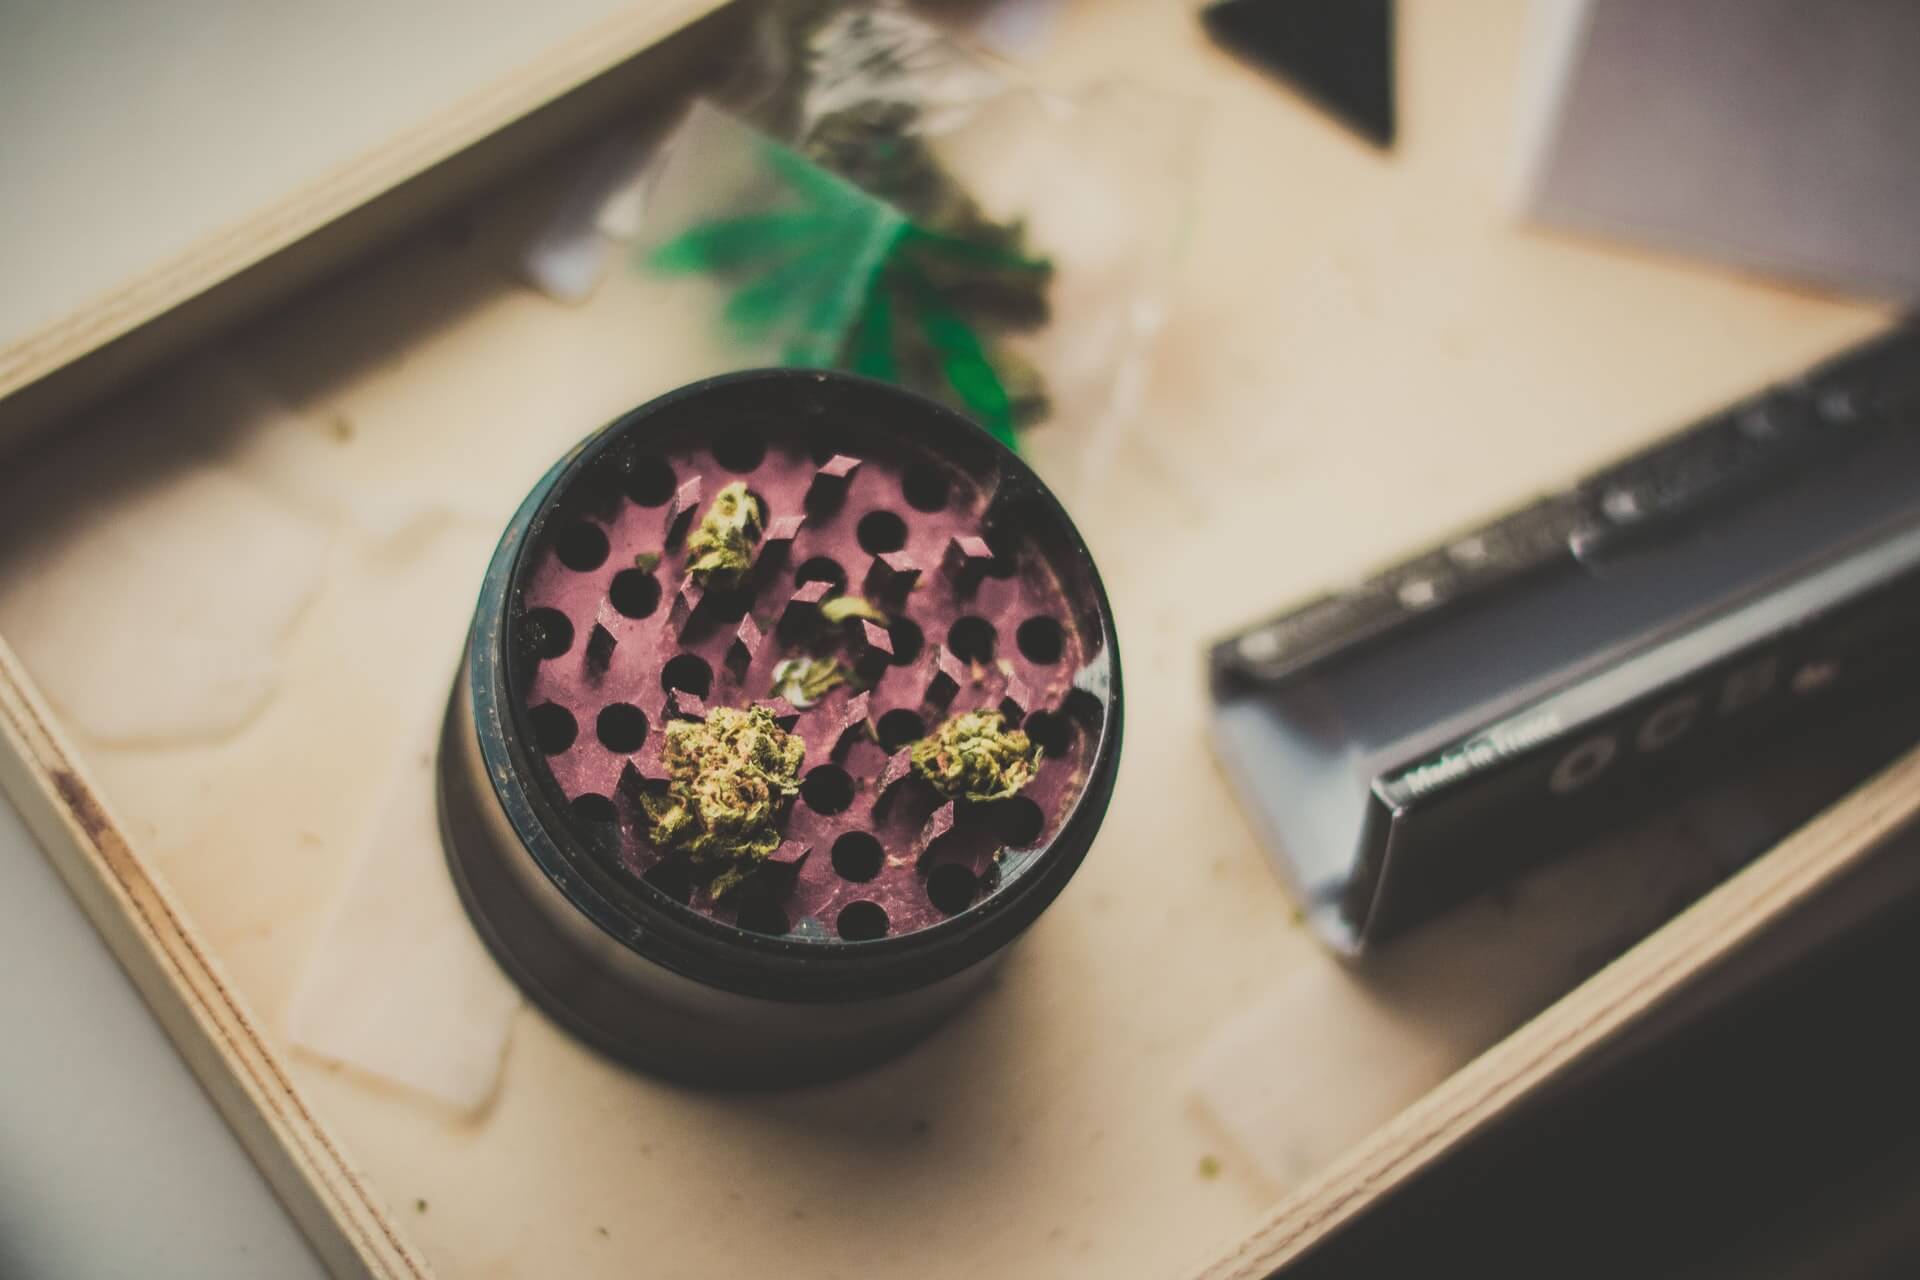 how to clean a grinder